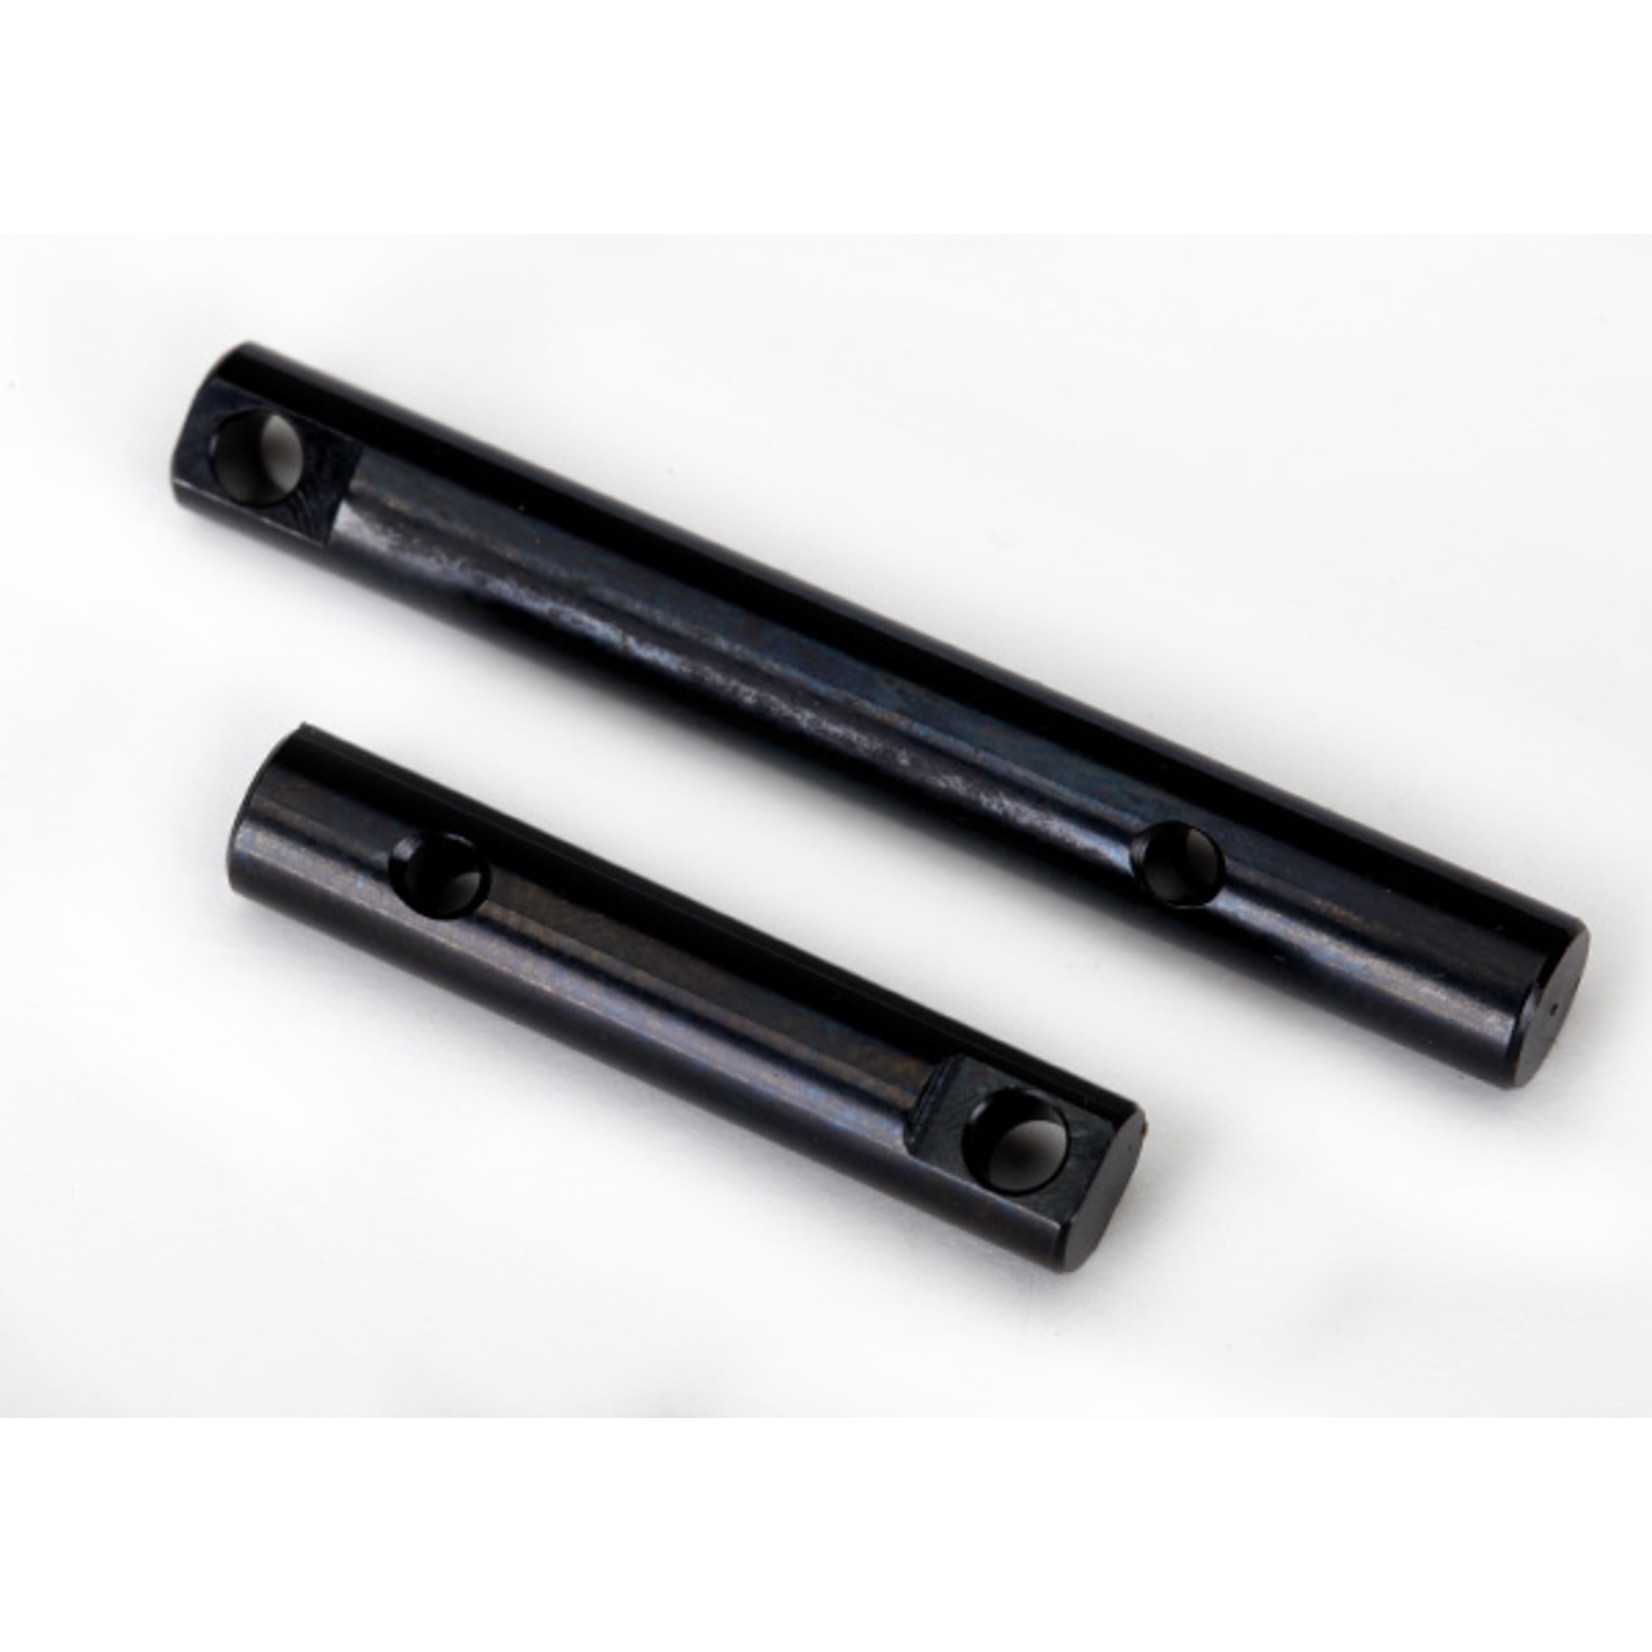 Traxxas 8286 - Output shafts (transfer case), front & rear